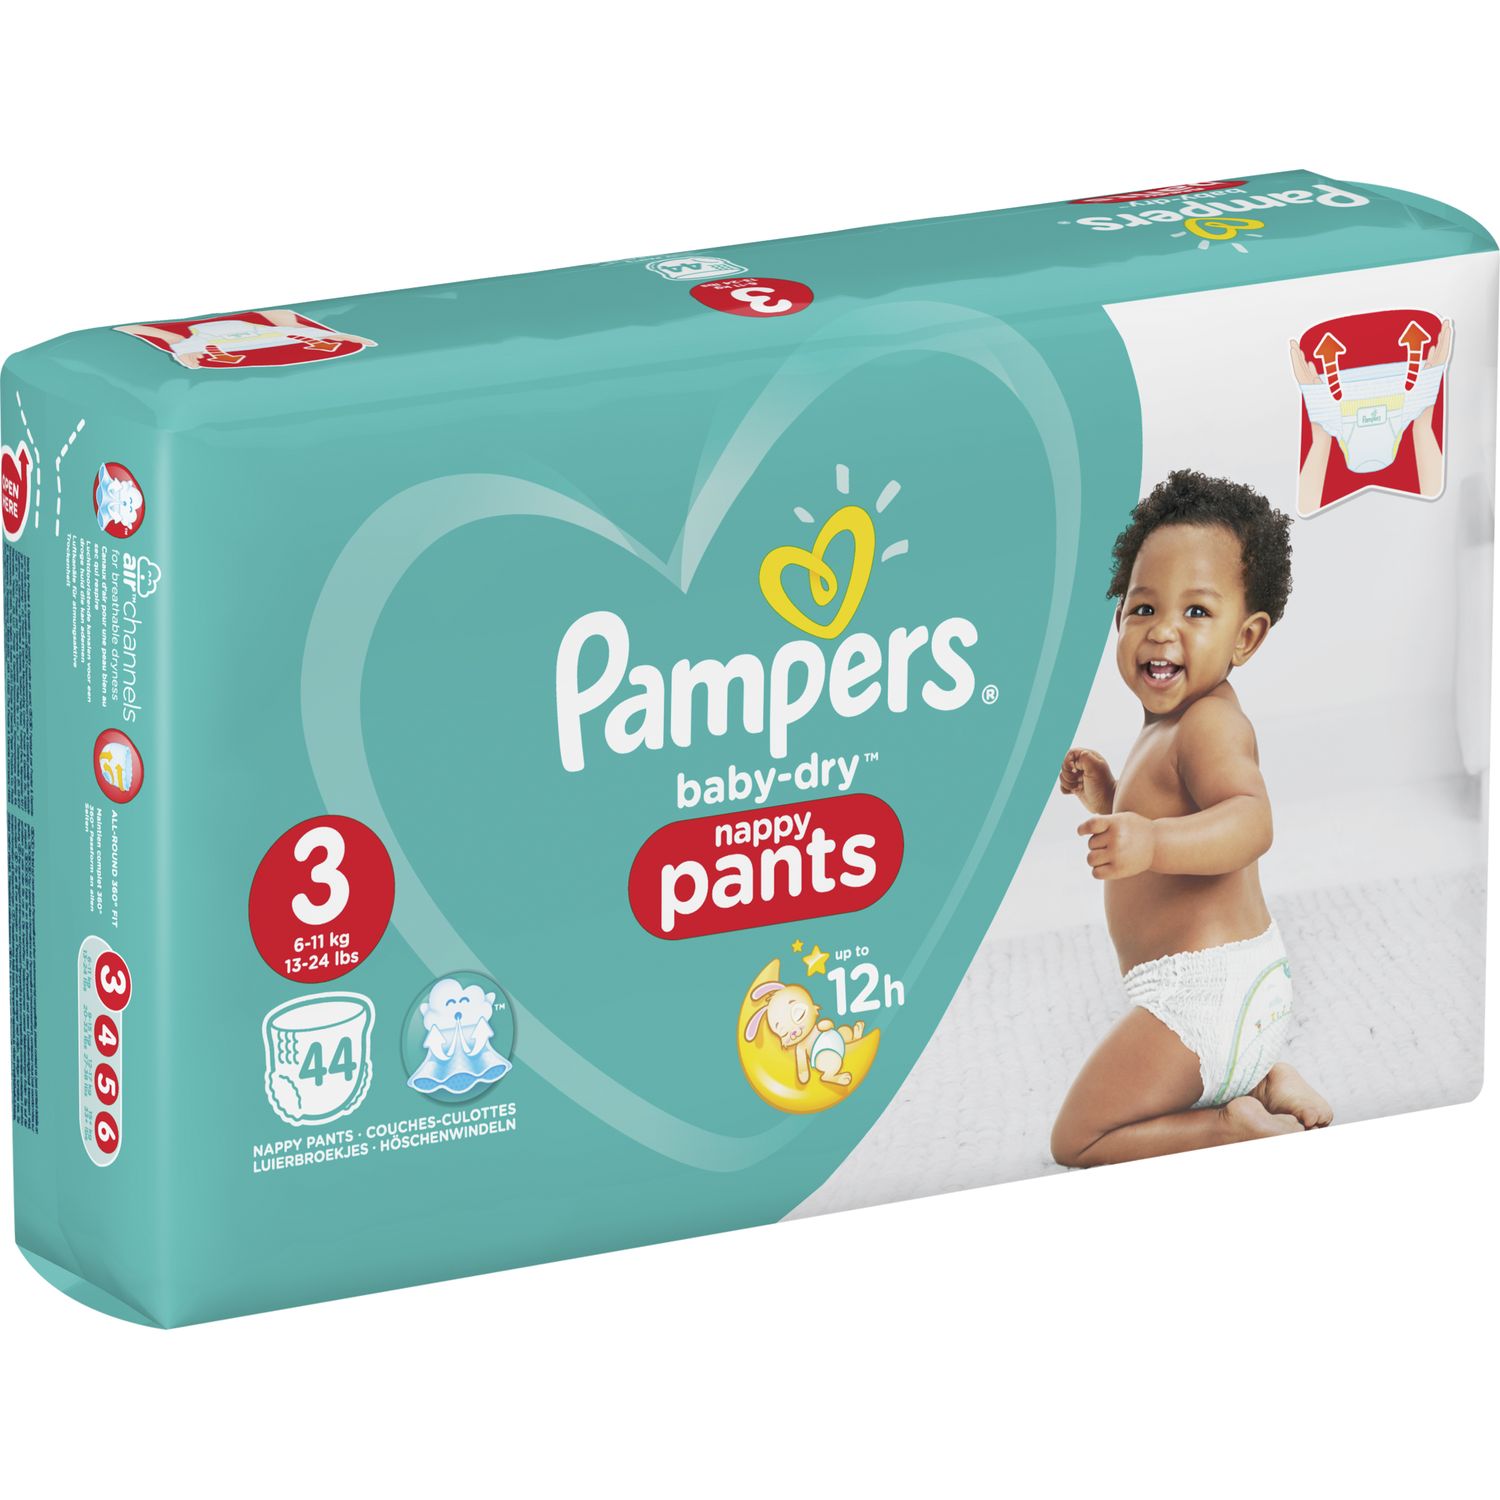 Couches-Culottes Pampers - Baby Dry Nappy Pants Taille 3 (6-10 kg) - 26  culottes MRM00229 - Sodishop